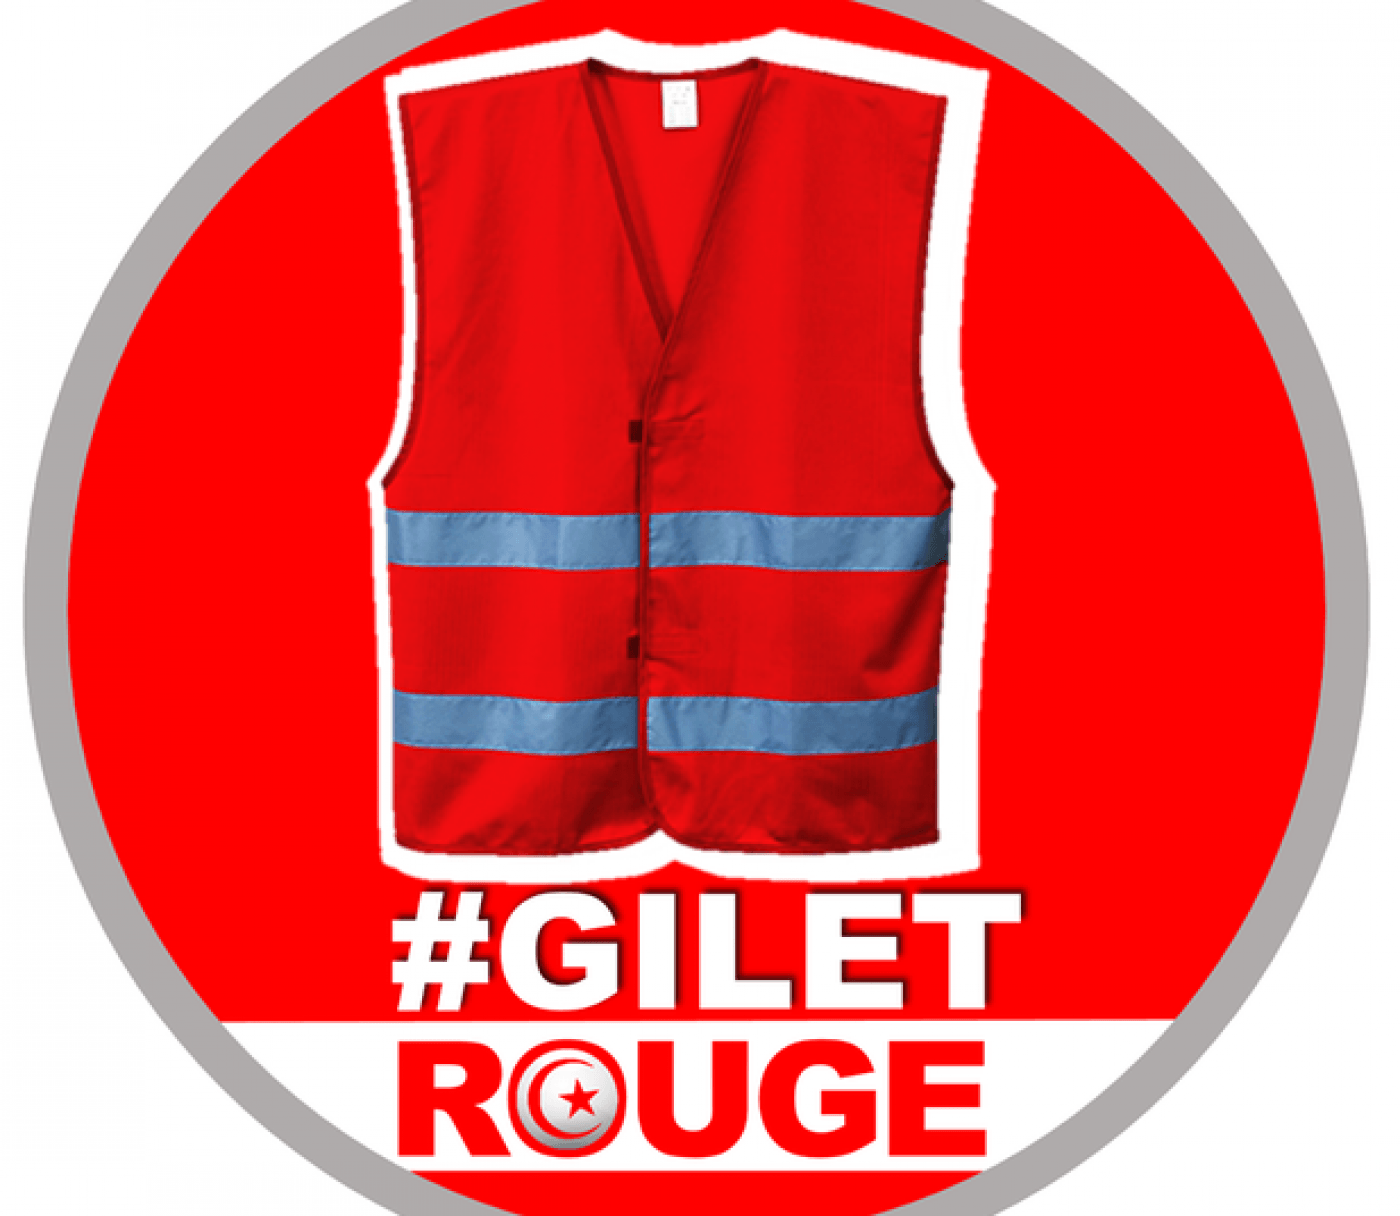 Middle Eastern Red Logo - Youth group starts 'red vests movement' to 'save Tunisia' | Middle ...